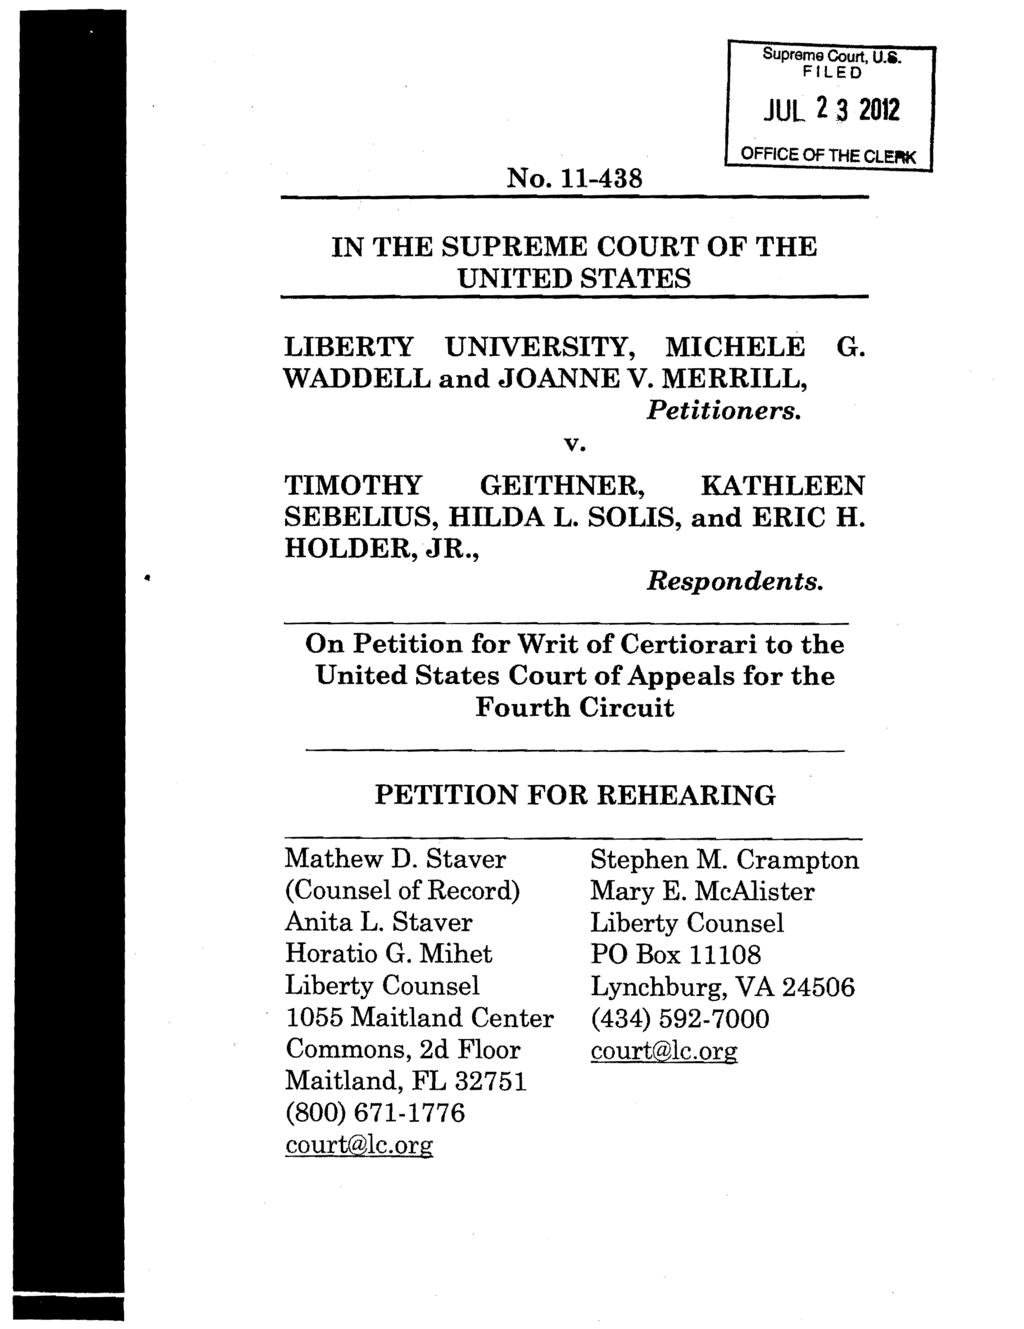 Suprema Court, u.s. FILED JUL 23 2012 No. 11-438 OFFice OF THE CLEJItK IN THE SUPREME COURT OF THE UNITED STATES LIBERTY UNIVERSITY, MICHELE G. WADDELL and JOANNE V. MERRILL, Petitioners. v.